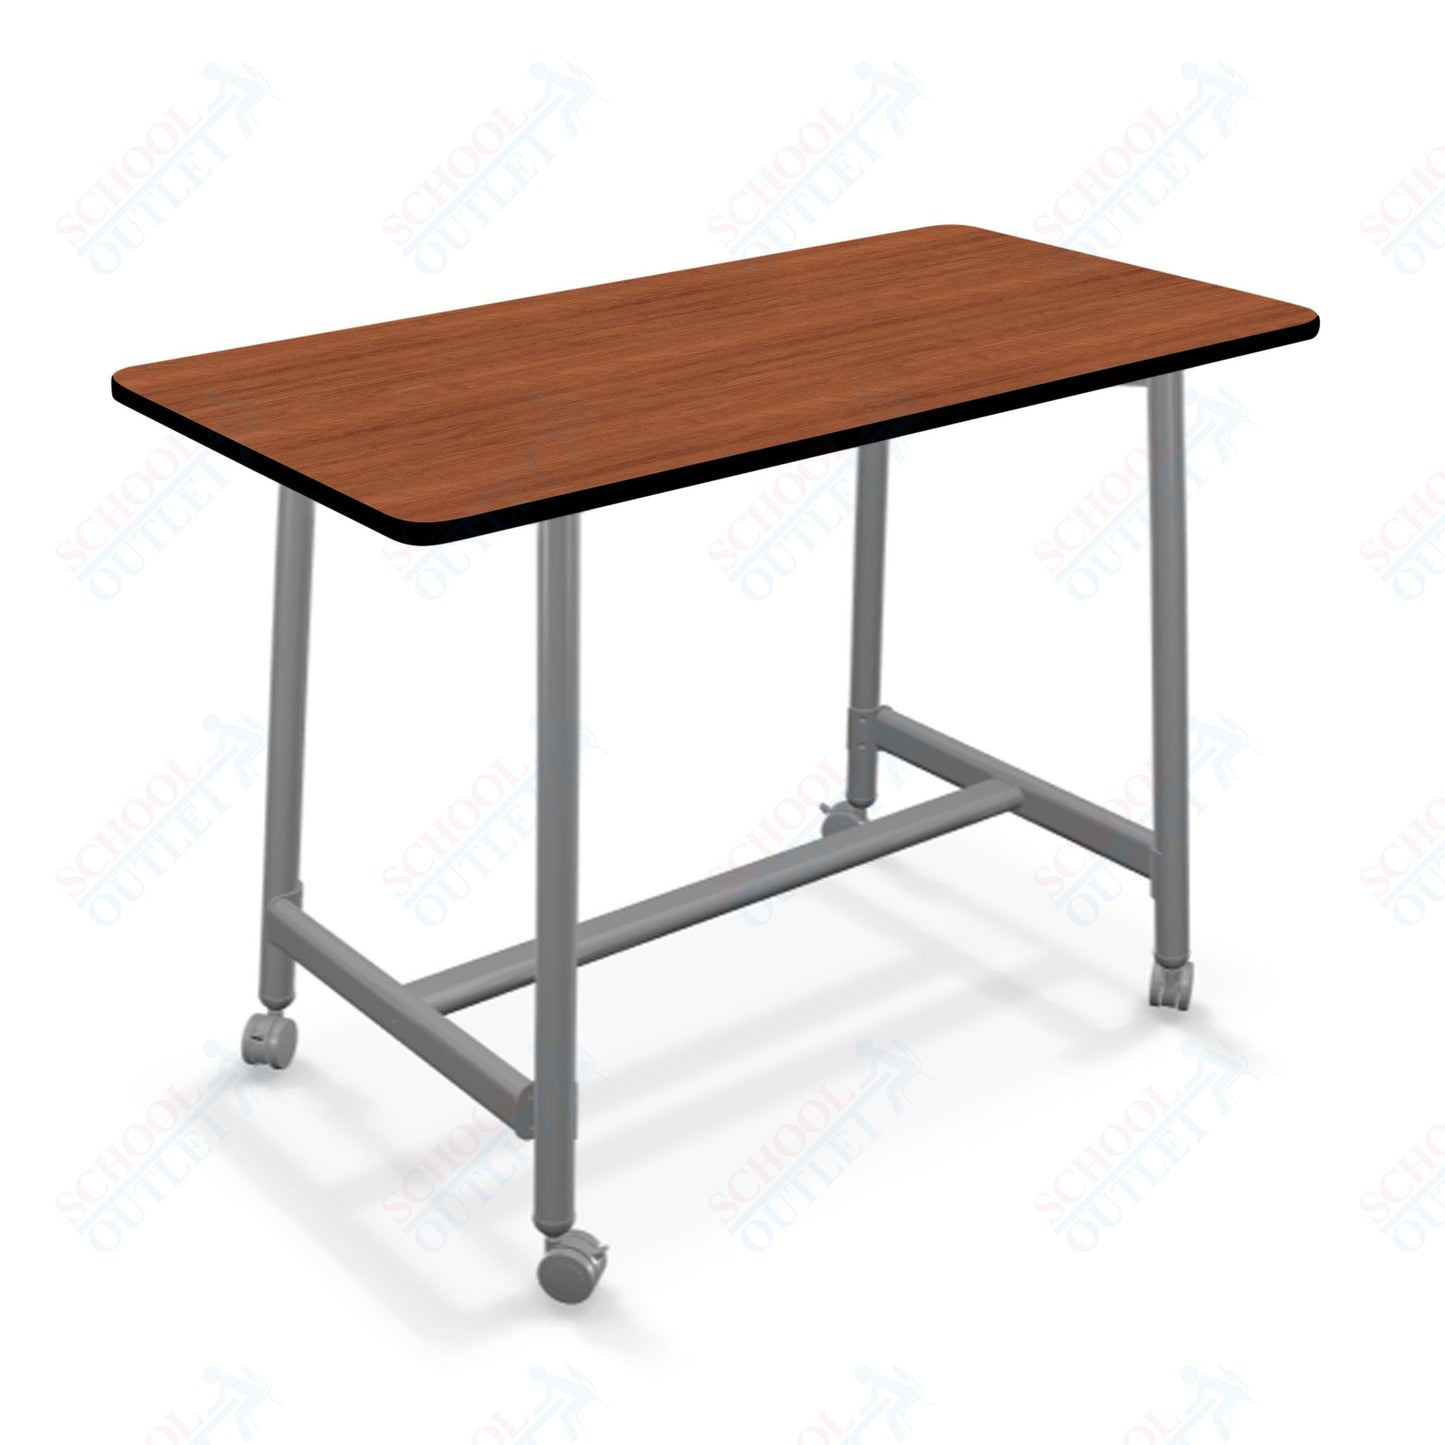 Mooreco Akt Table – 30"D x 60"W Rectangle, Laminate or Butcher Block Top, Fixed Height Available in 29"H, 36"H, or 42"H